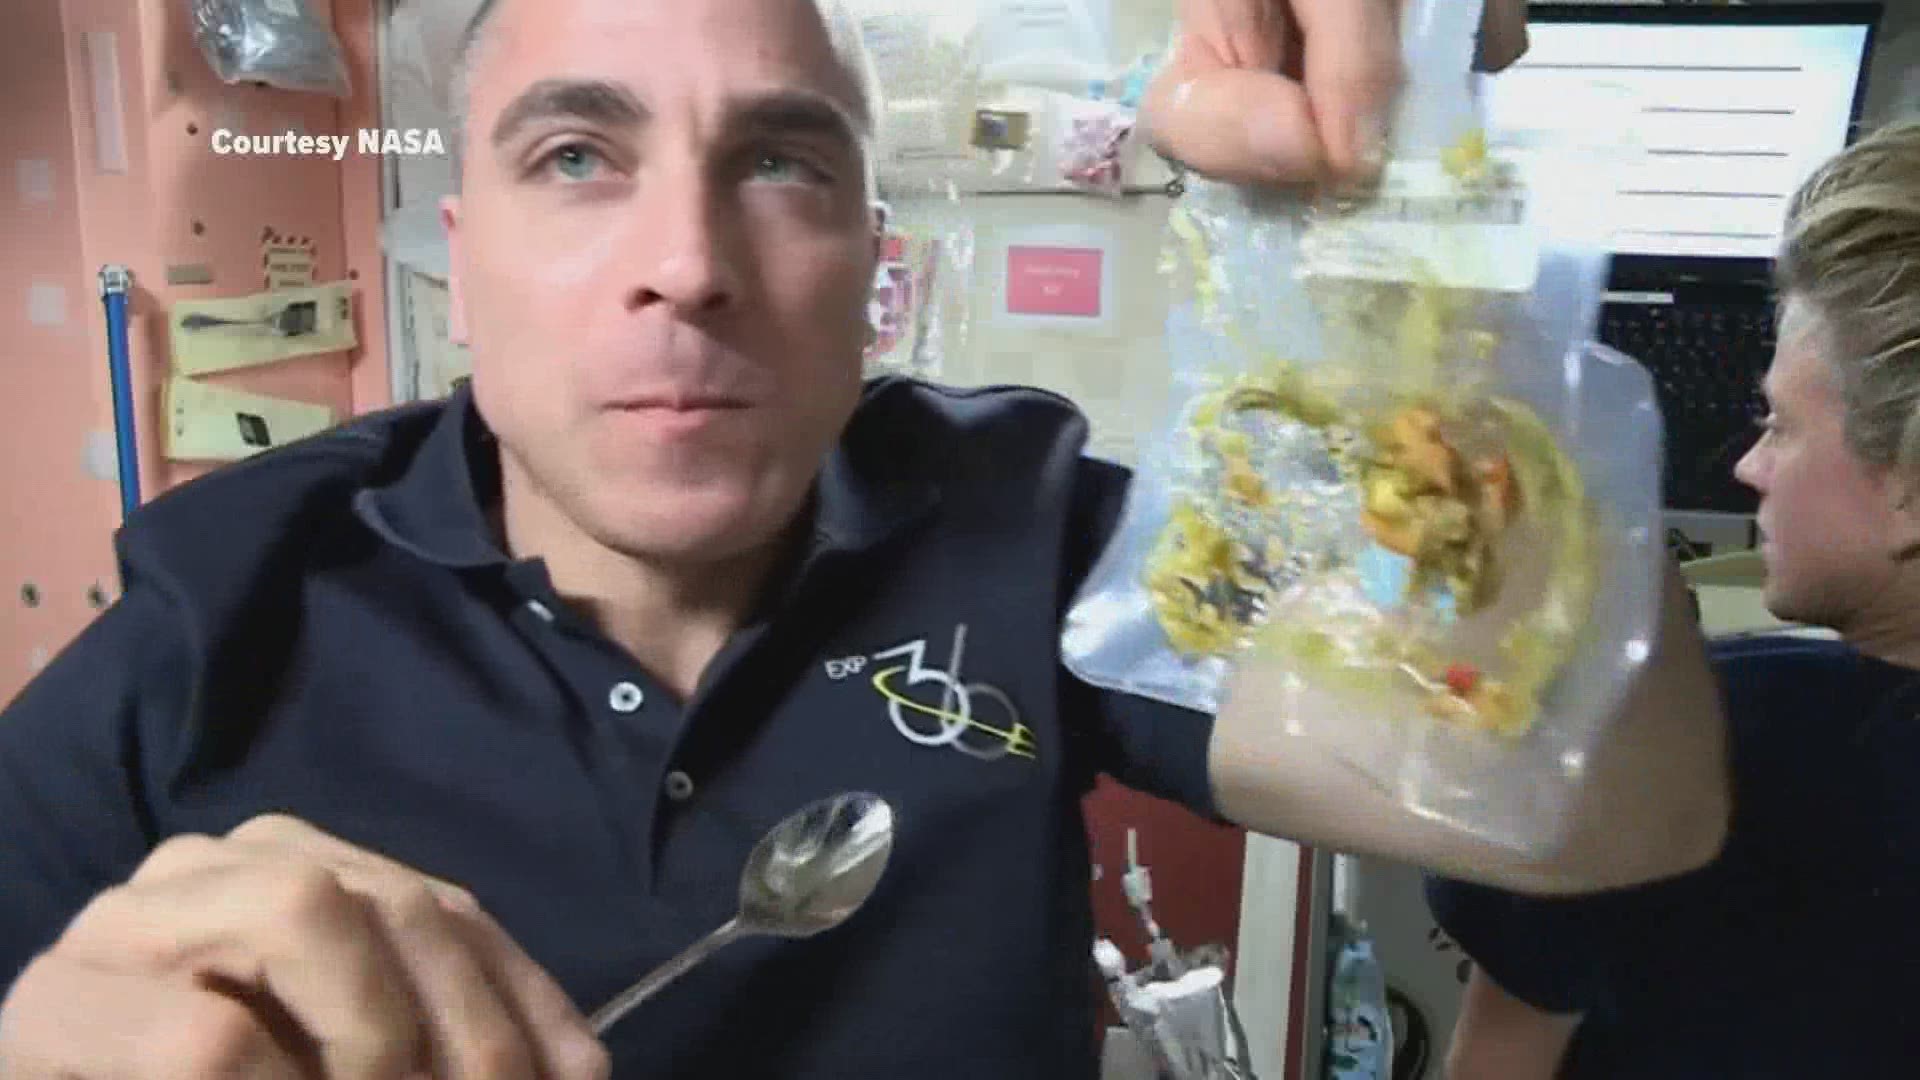 Two culinary students from Grand Rapids Community College have created a dish that could be sent to astronauts on the International Space Station to eat.